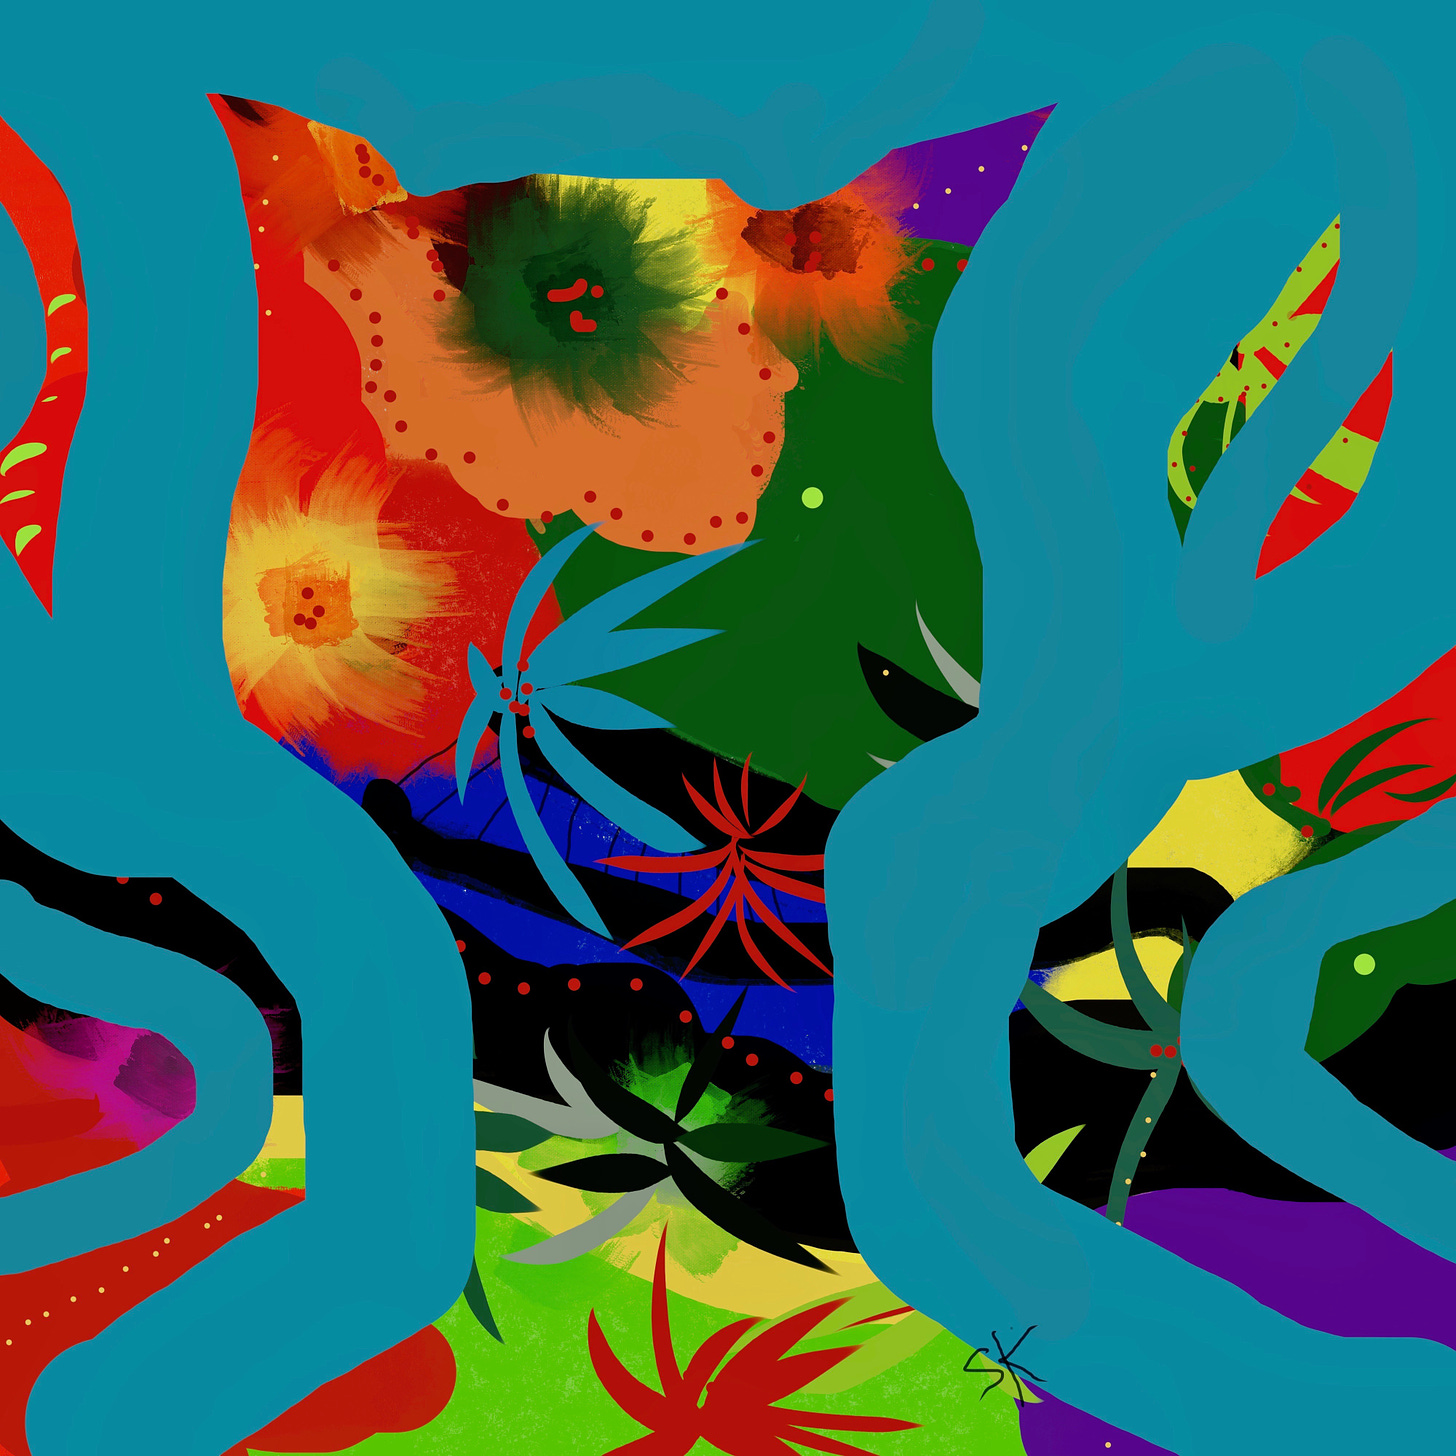 Abstract multicolored impression of a cat's head by Artist Sherry Killam